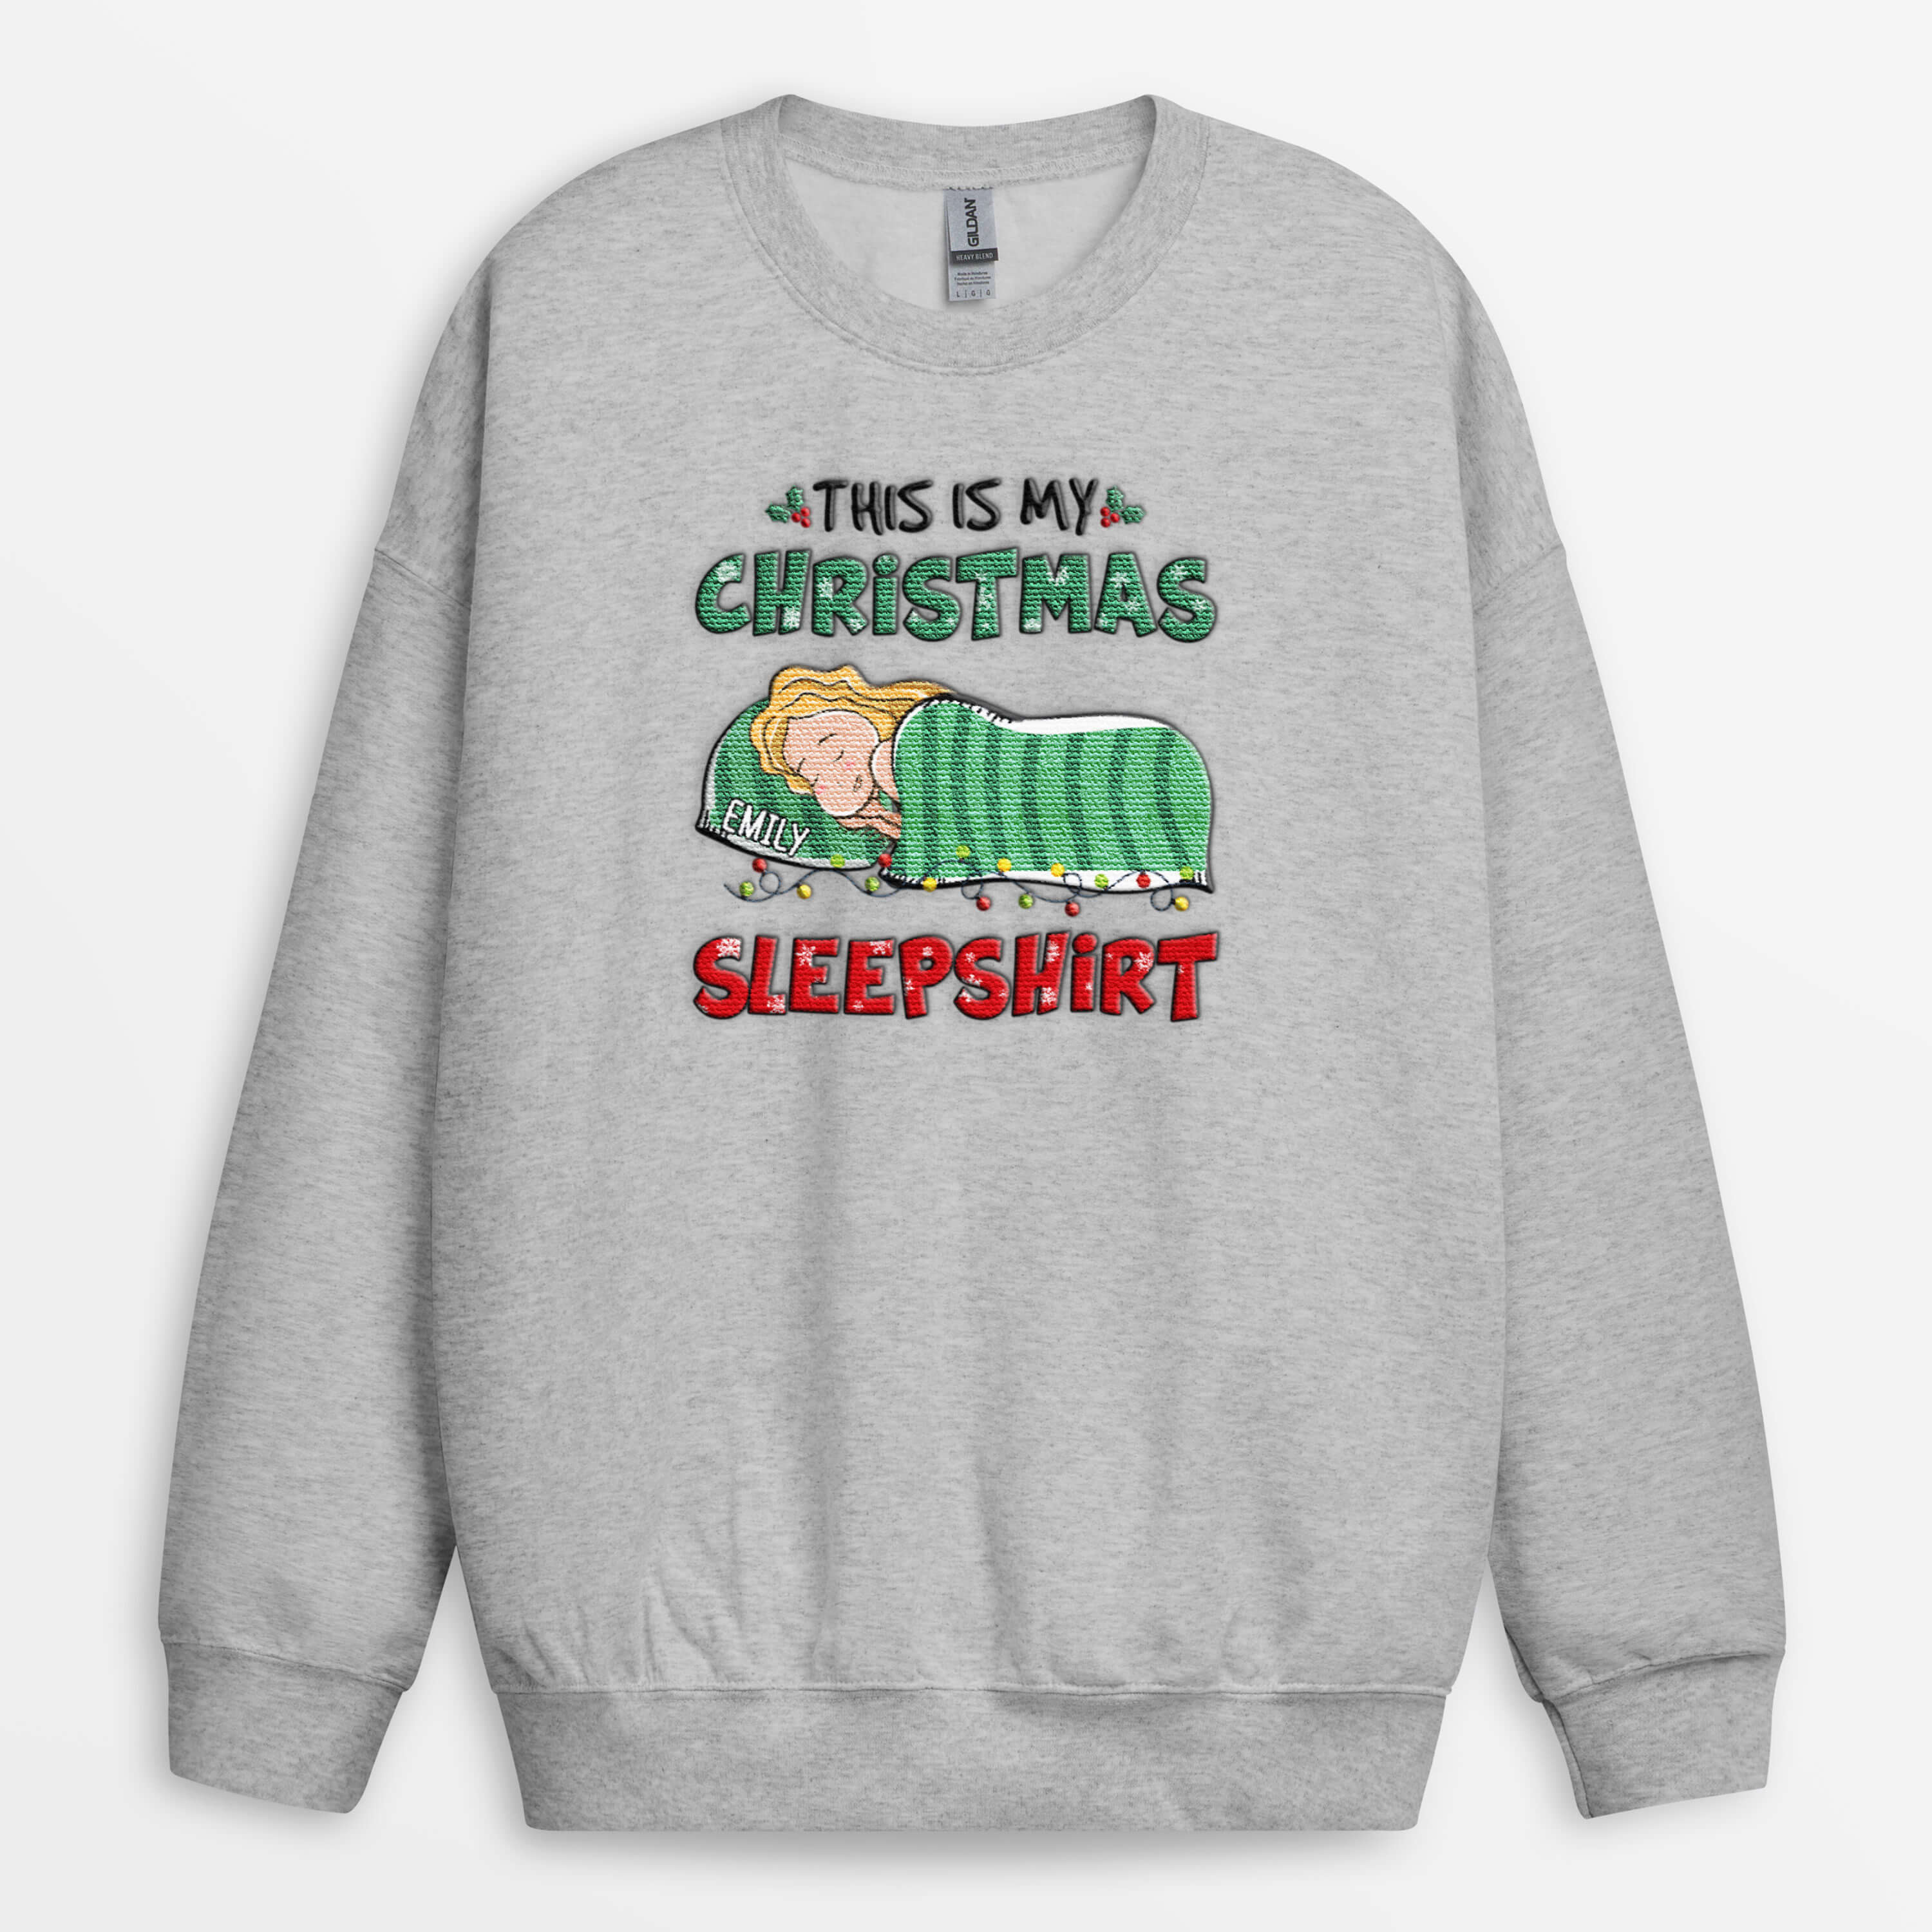 personalized this is my christmas sleepshirt broidered sweatshirt 1367a3d5a 1_3